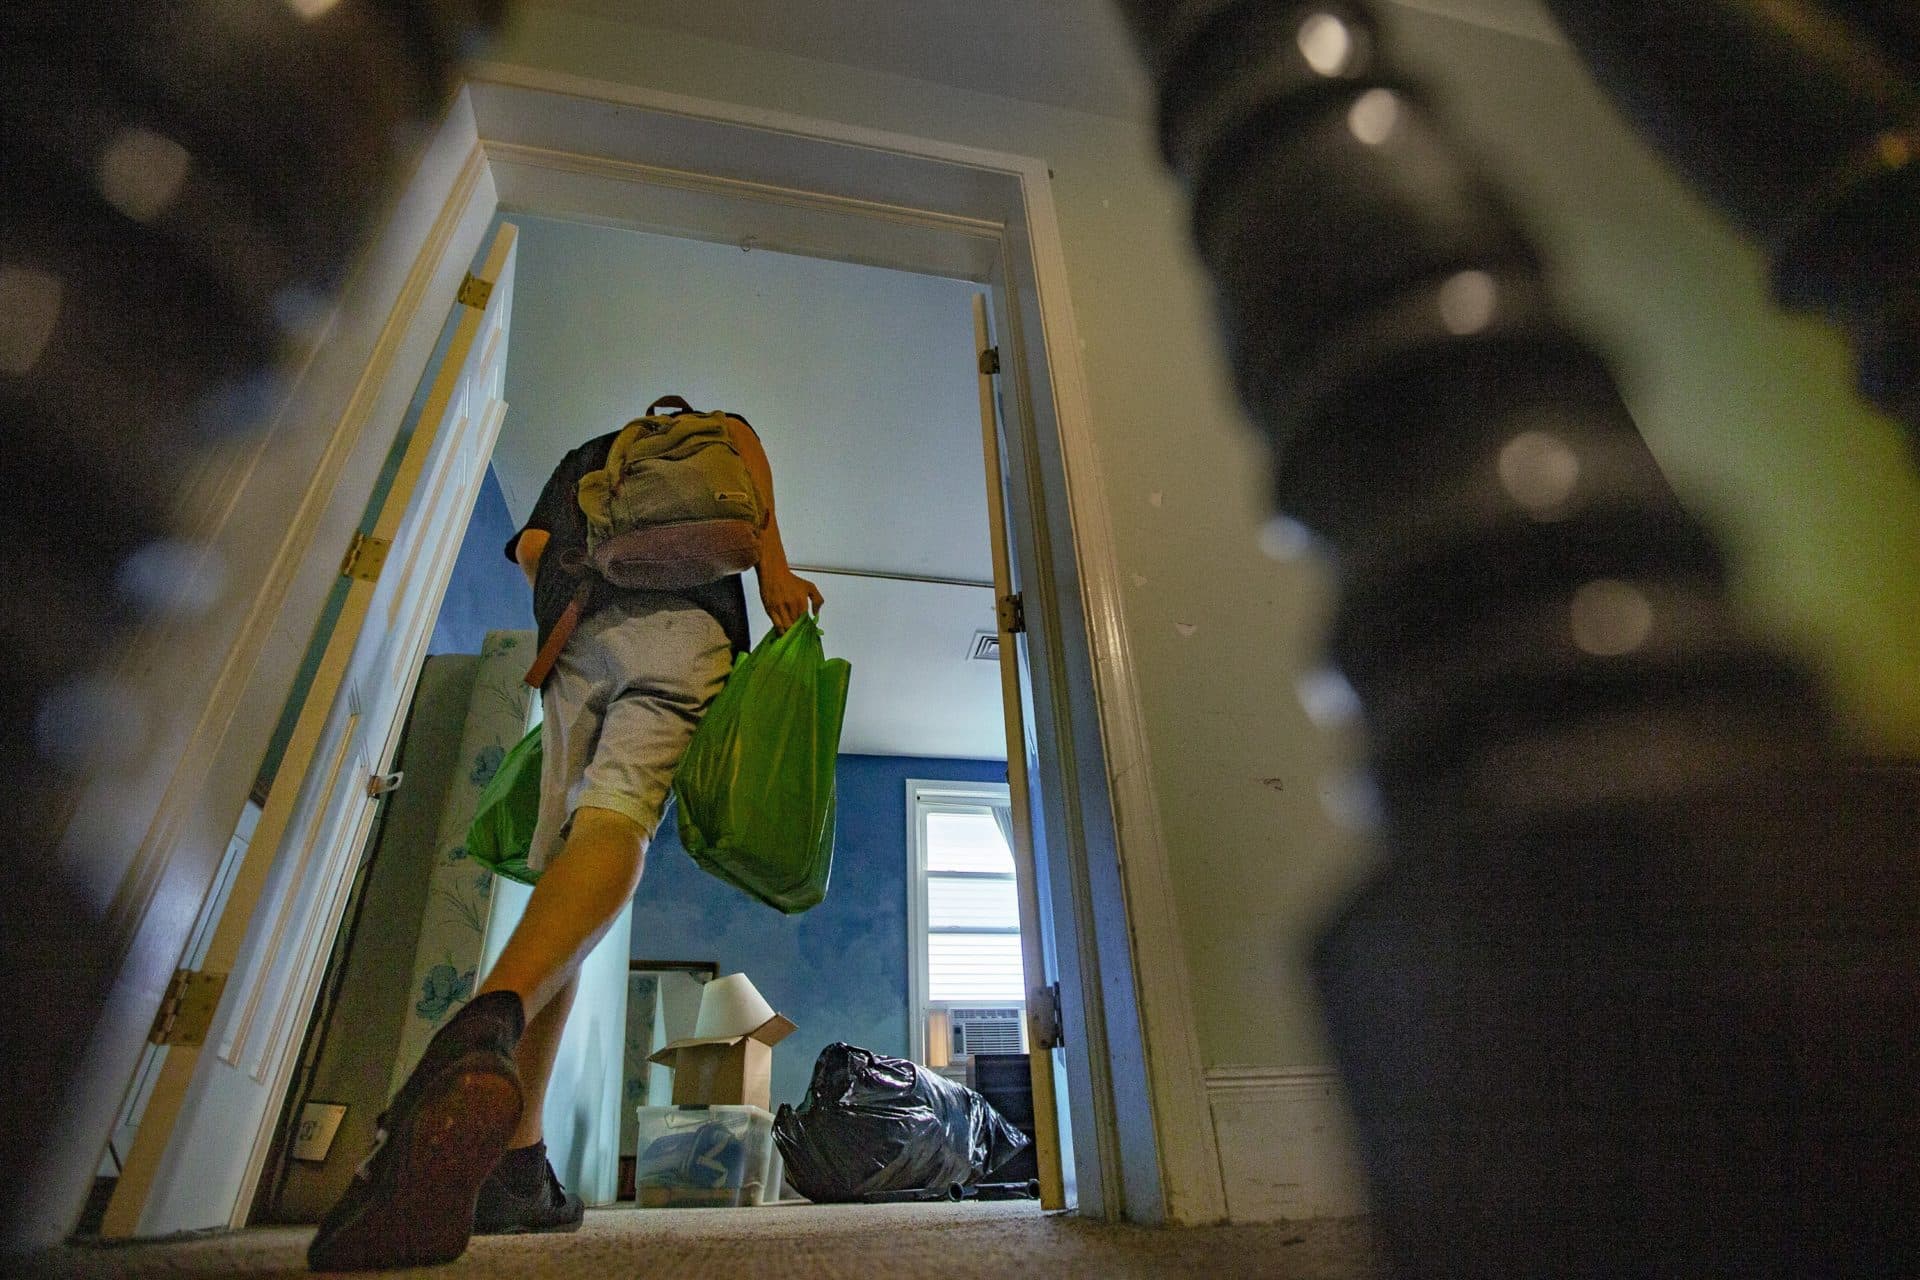 Mike Totten moves into his new room in Allston. (Jesse Costa/WBUR)